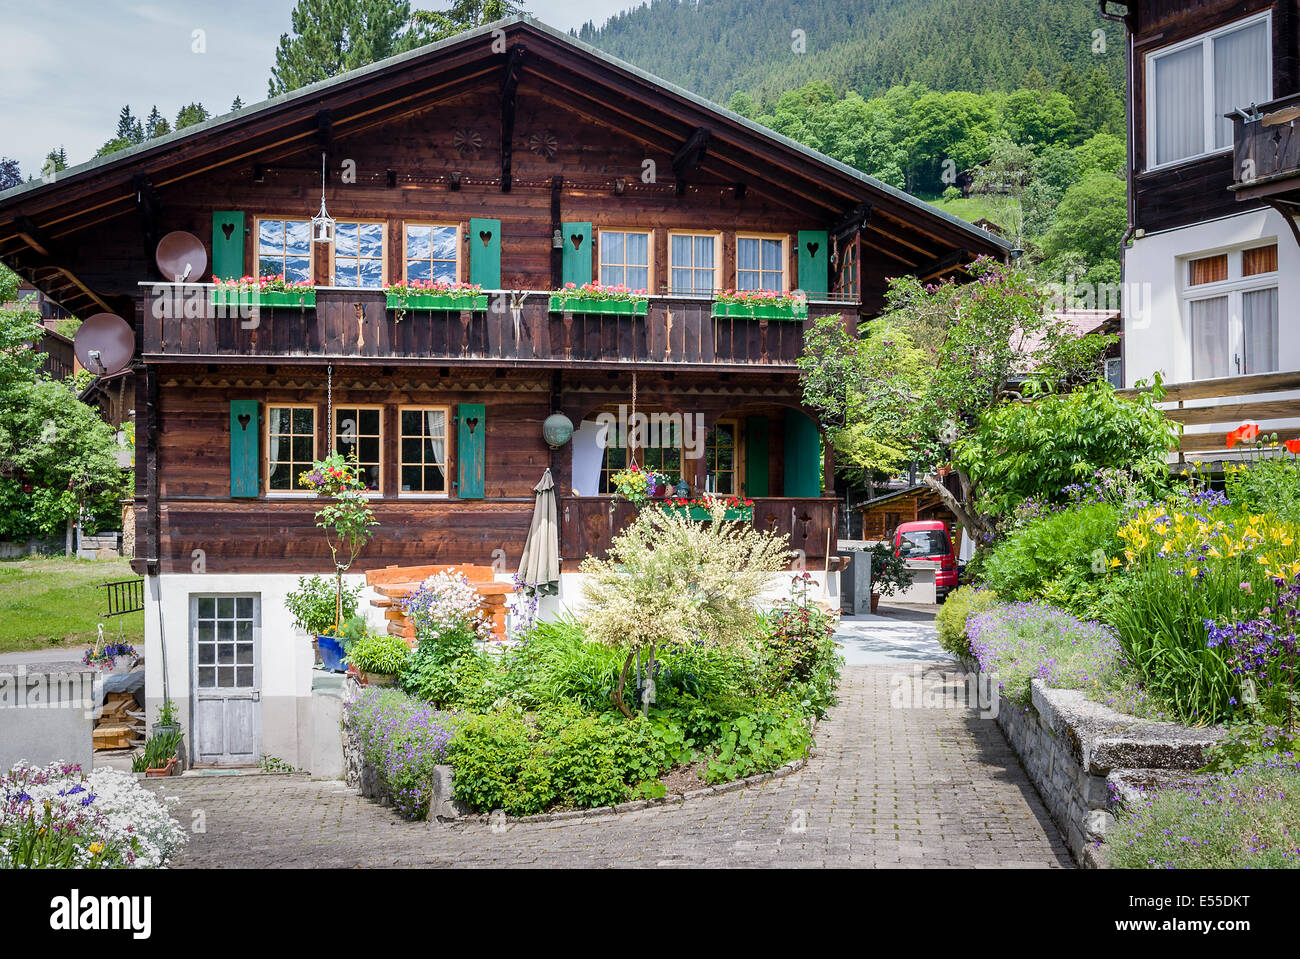 Wooden chalet typical of Swiss architecture in Wengen Stock Photo